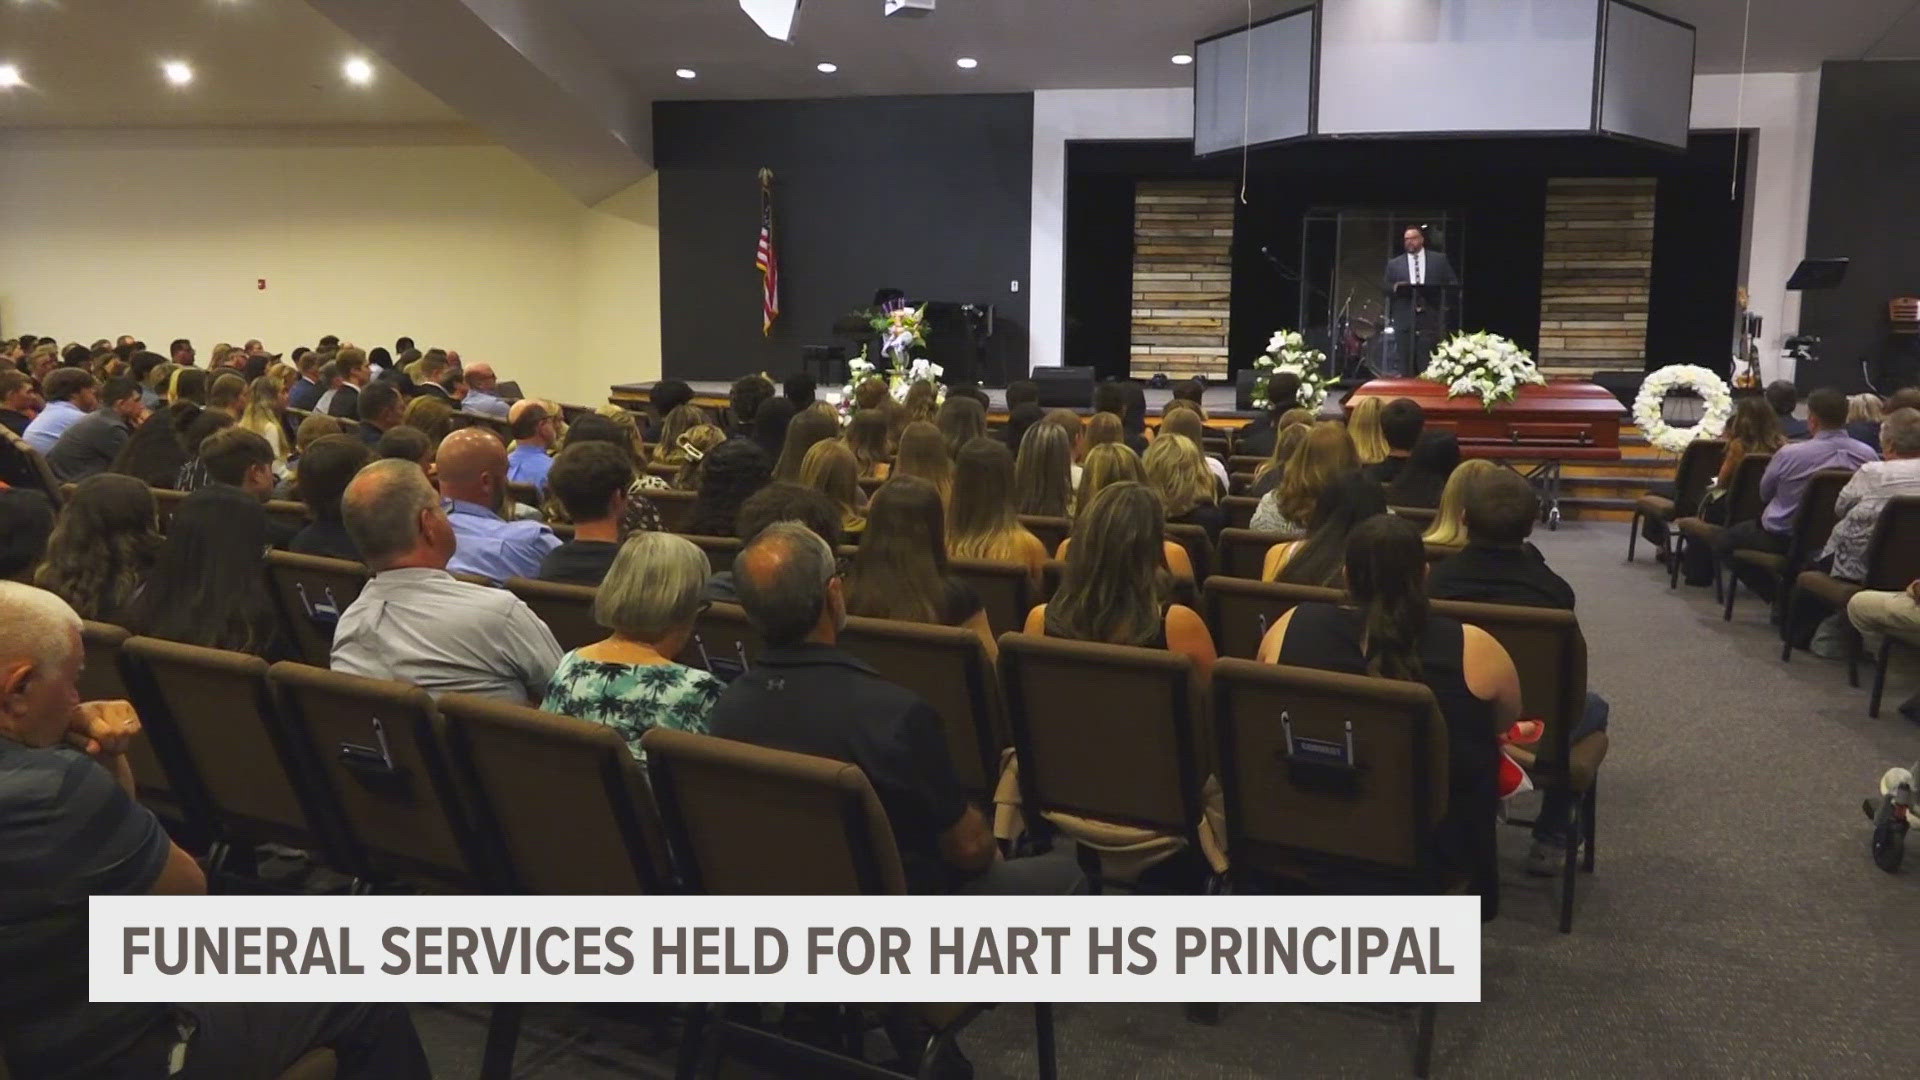 No less than a thousand people were in attendance for the Hart High School Principal's funeral Thursday afternoon, showing just how much of an impact he had.